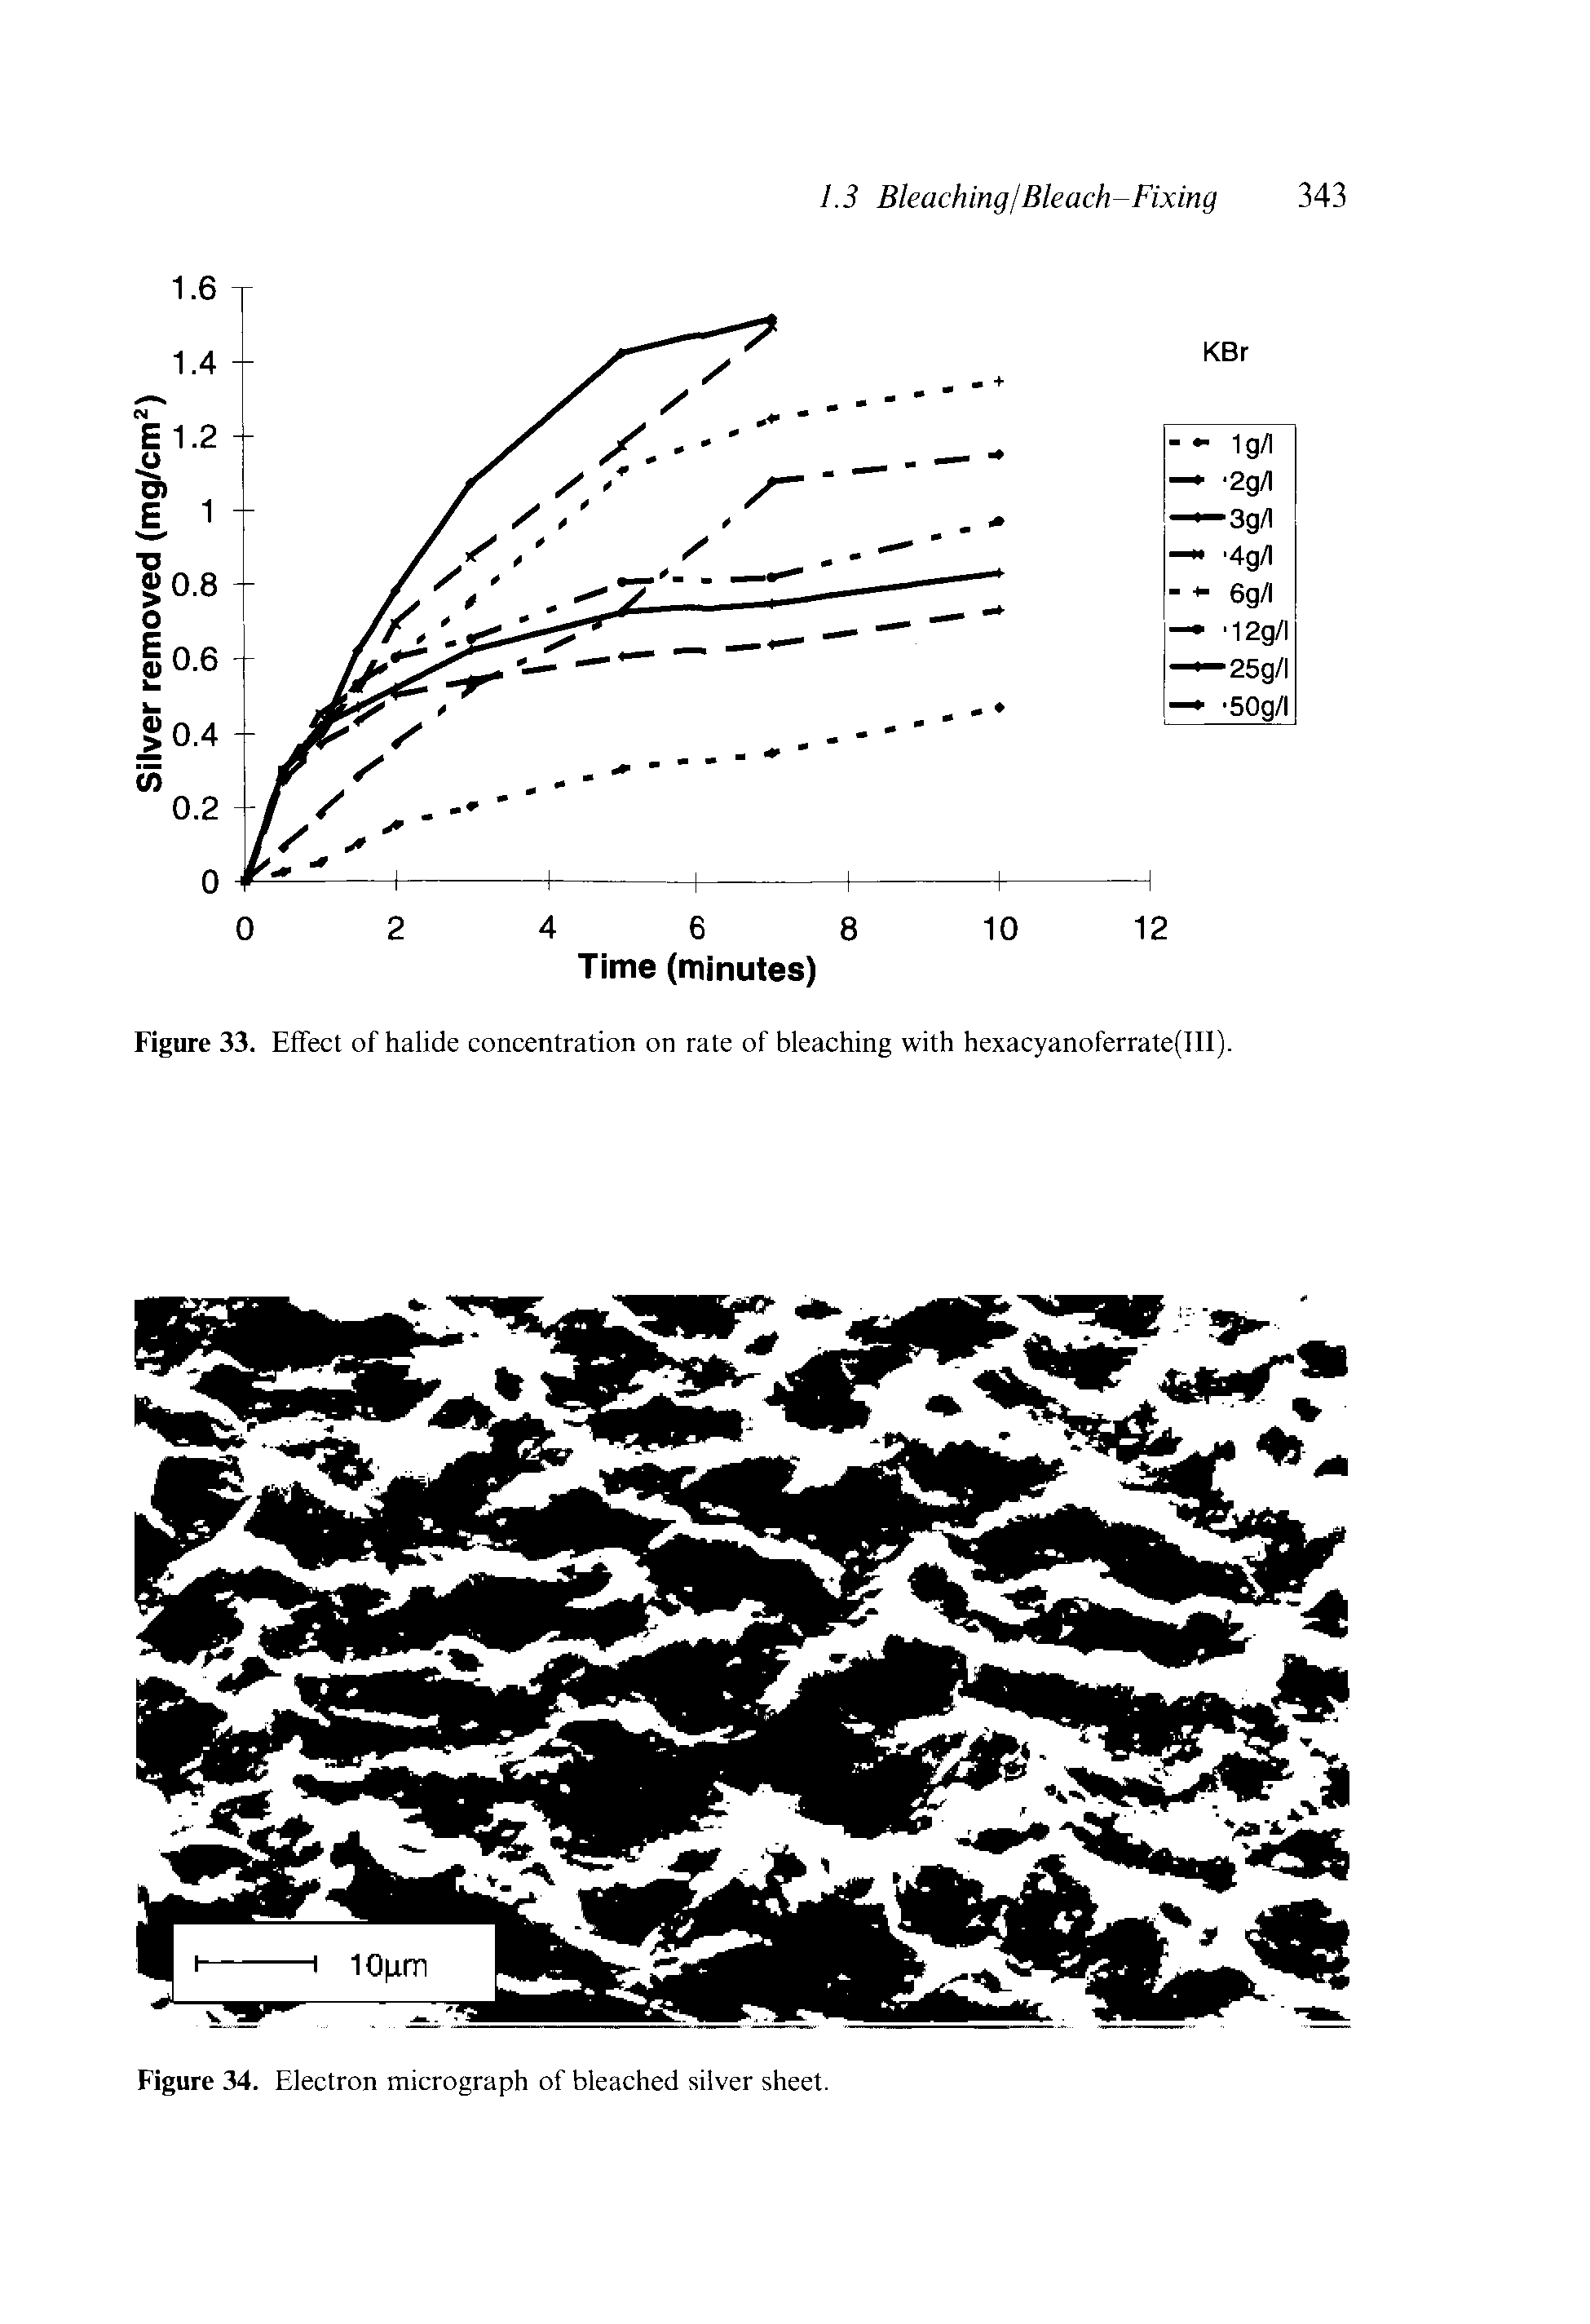 Figure 34. Electron micrograph of bleached silver sheet.